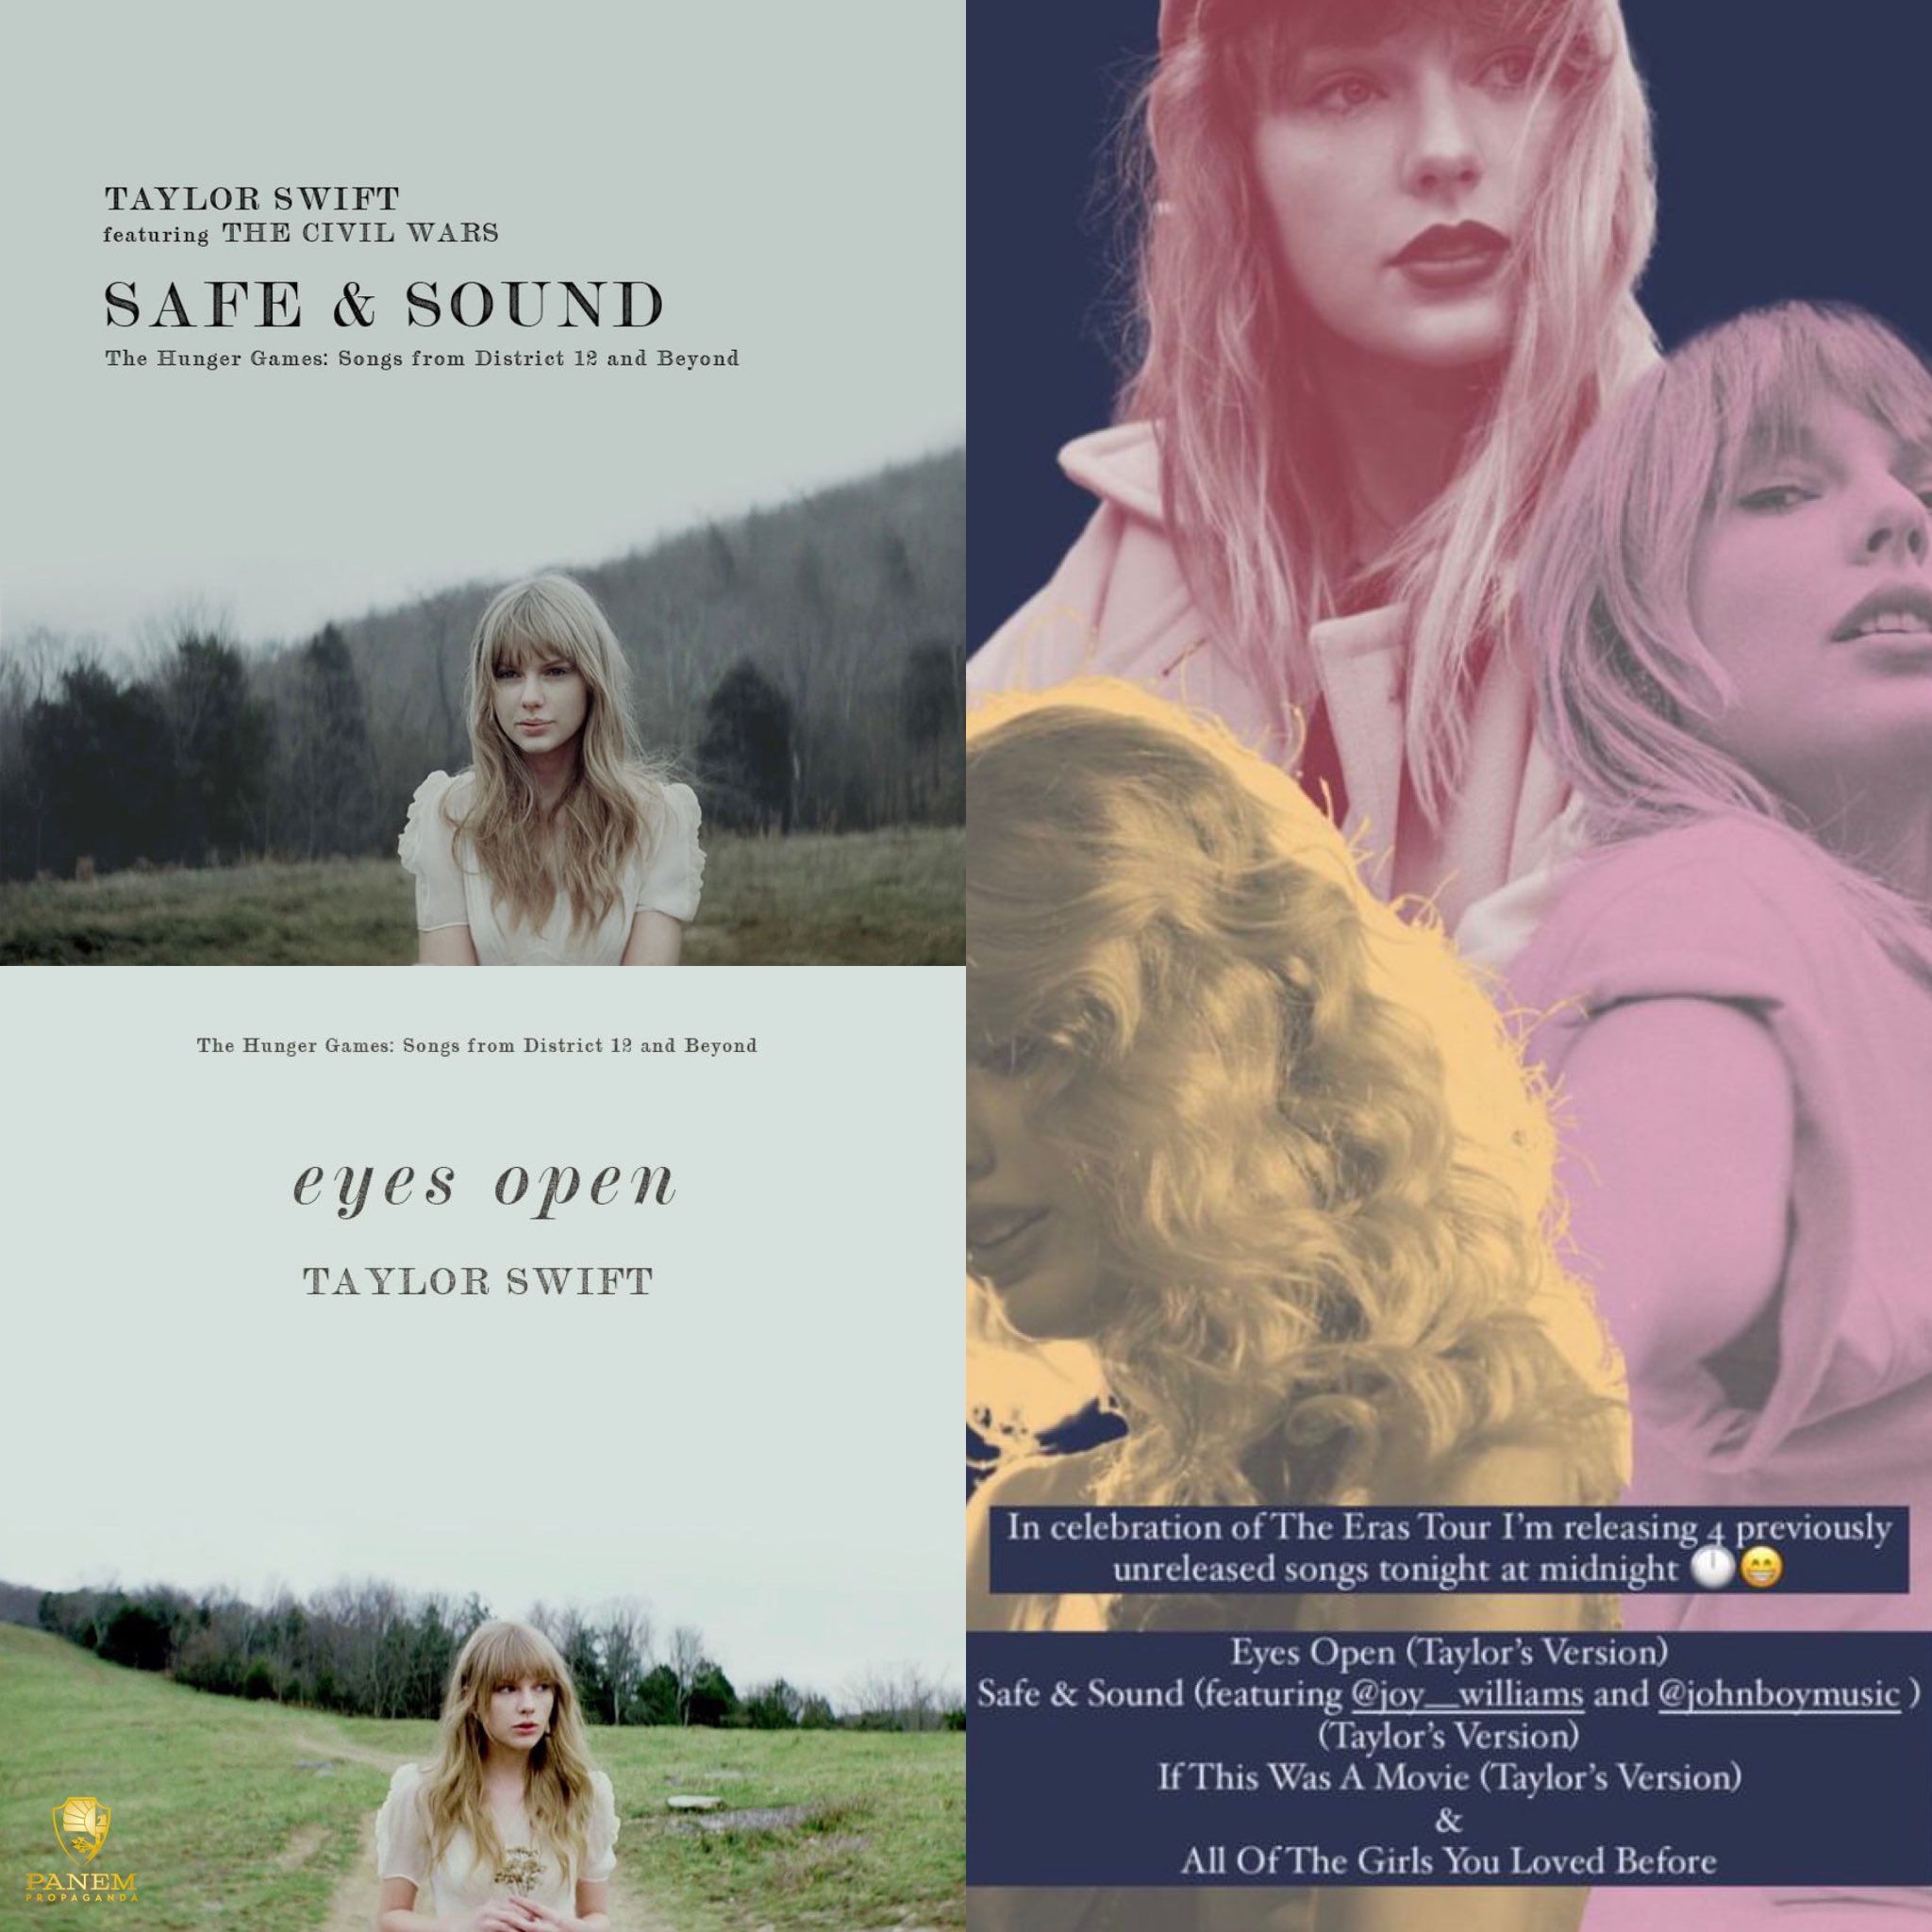 The Hunger Games: The Ballad of Songbirds and Snakes on Instagram: At  midnight (EST), Taylor Swift will be rereleasing 'Safe & Sound' and 'Eyes  Open' from the soundtrack of the first movie, 